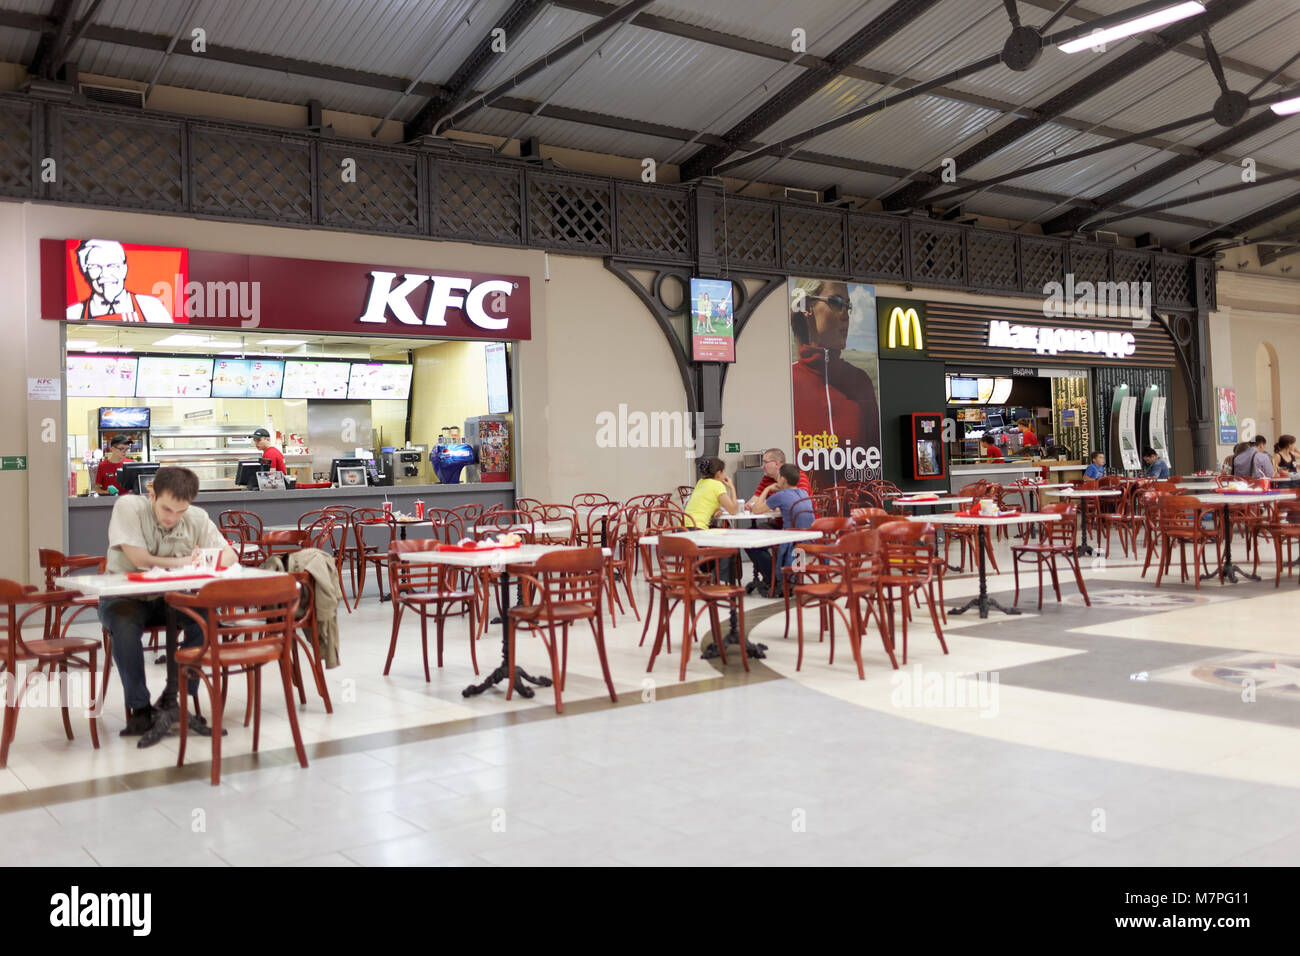 St. Petersburg, Russia - August 29, 2015: Food court in the shopping mall Varshavsky Express. The mall was established in 2006 in the former building  Stock Photo